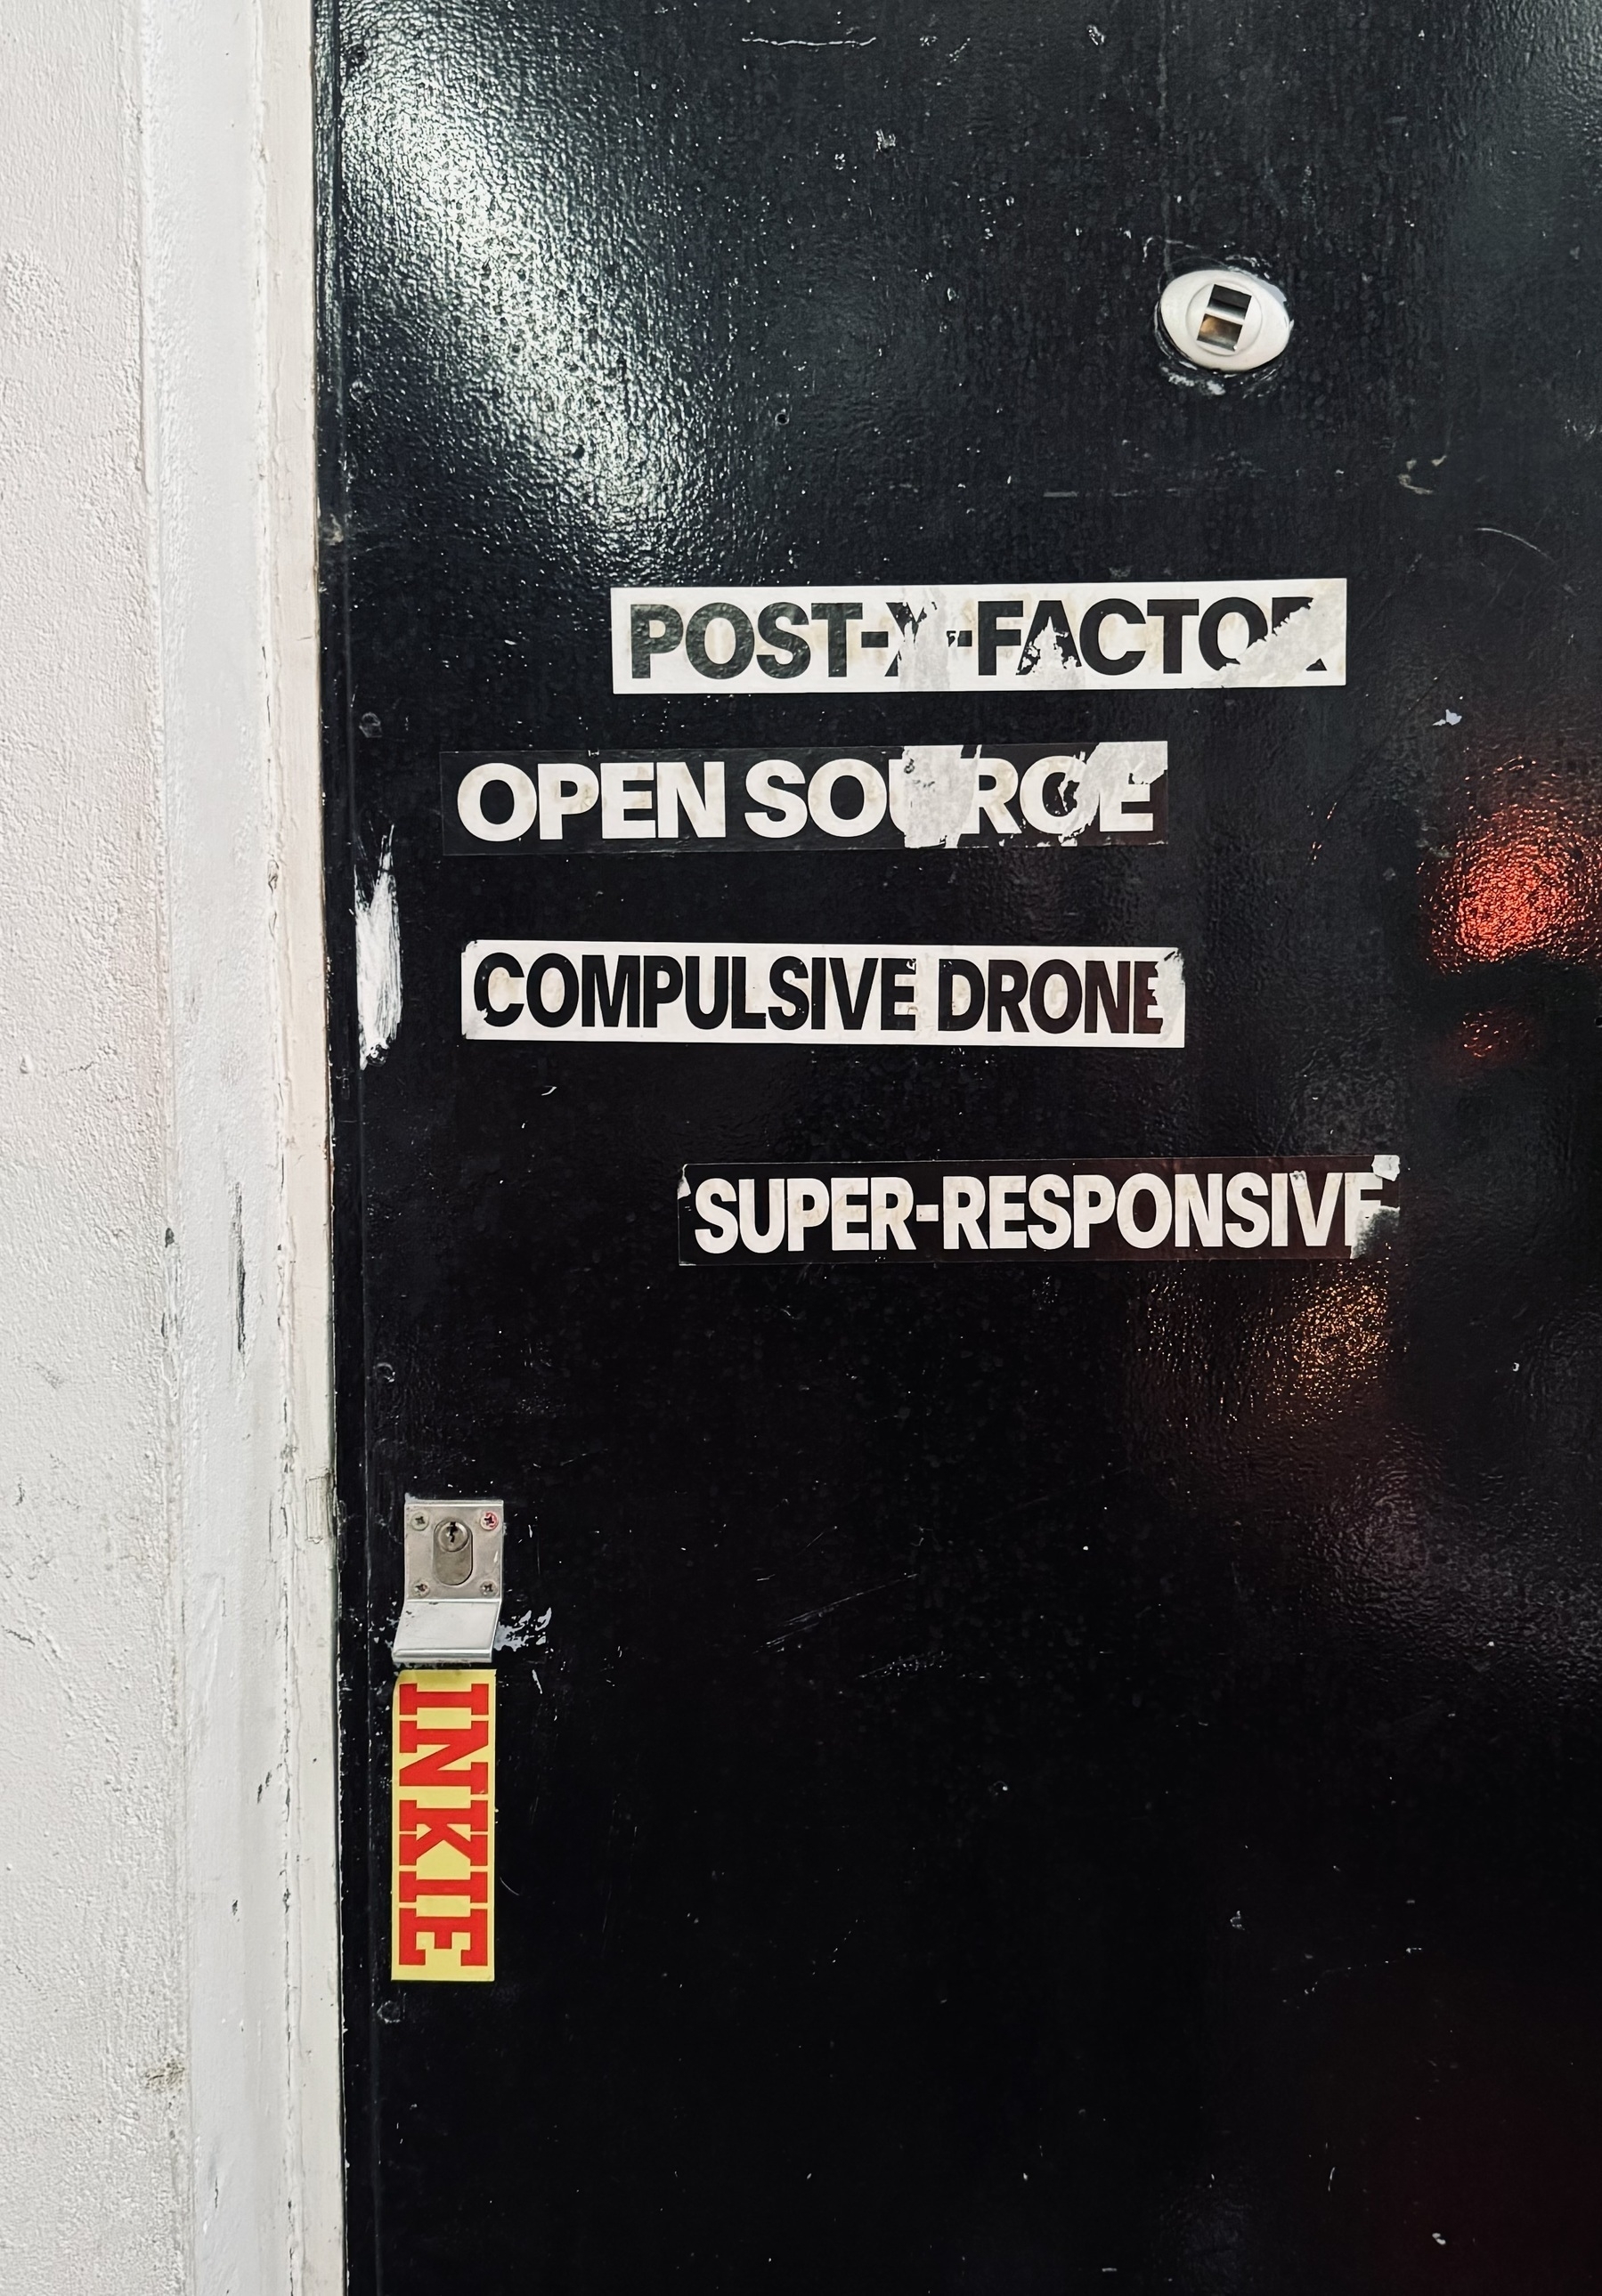 Stickers on a black door that say “post-x-factor”, “open source”, “compulsive drone”, and “super-responsive”.